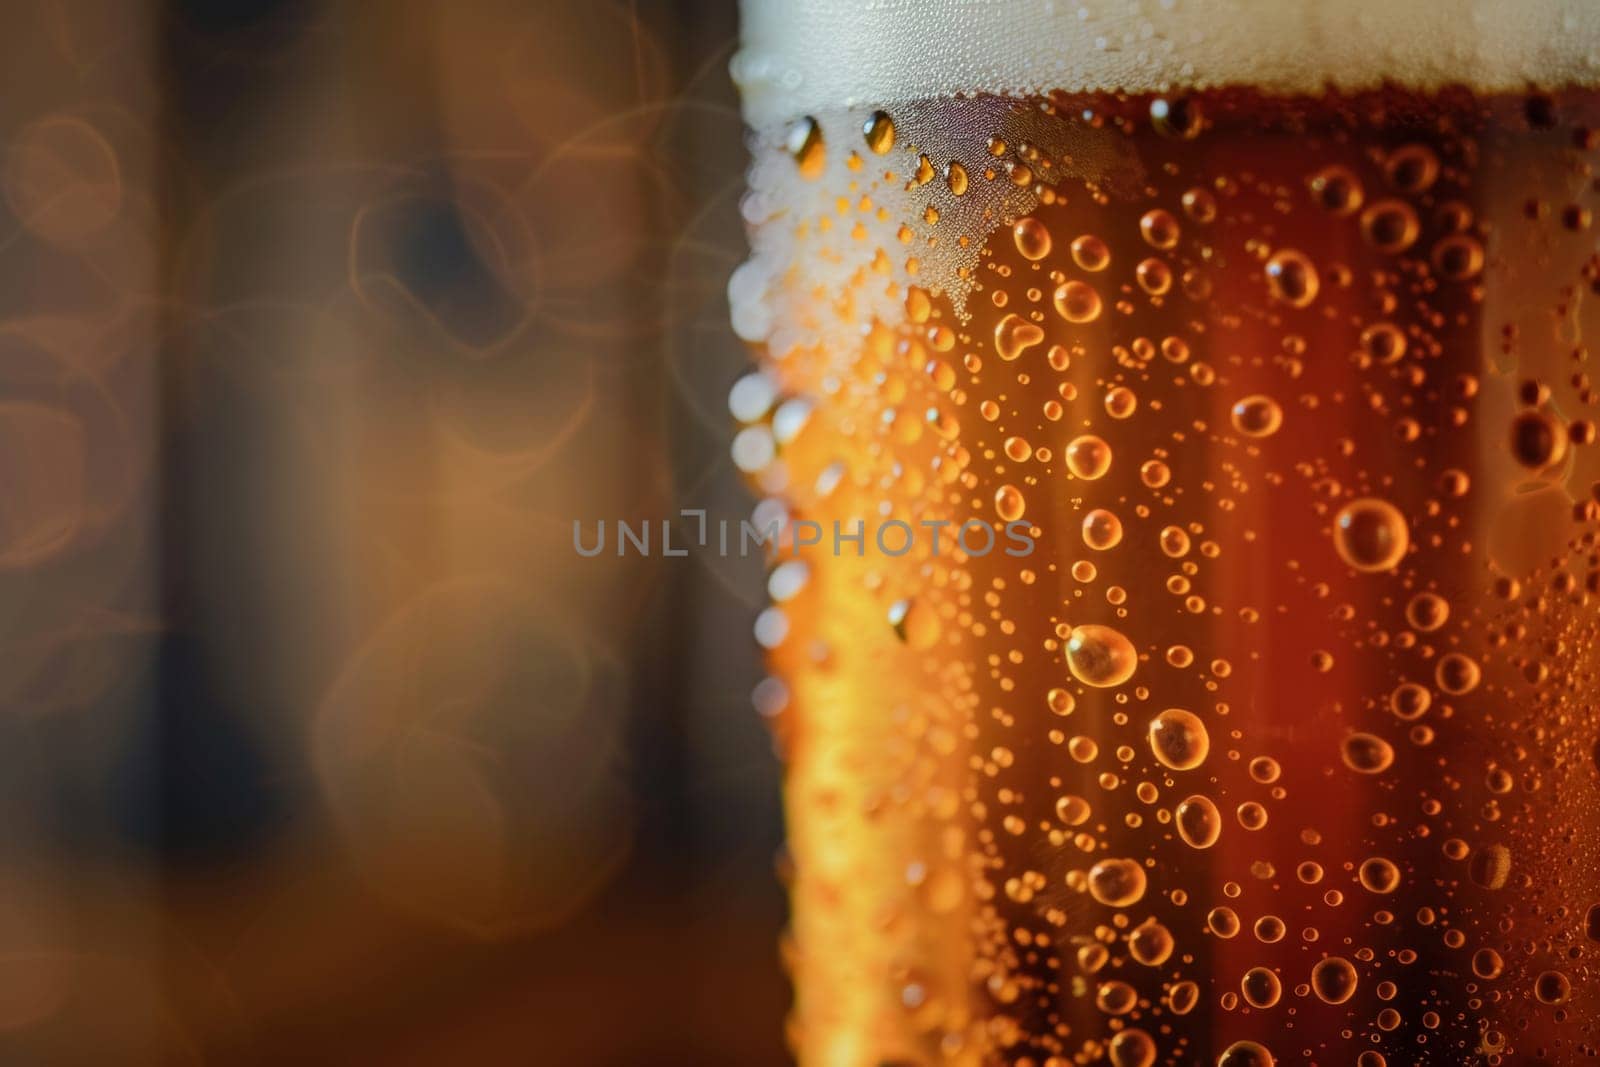 Chilled Craft Beer with Condensation by andreyz